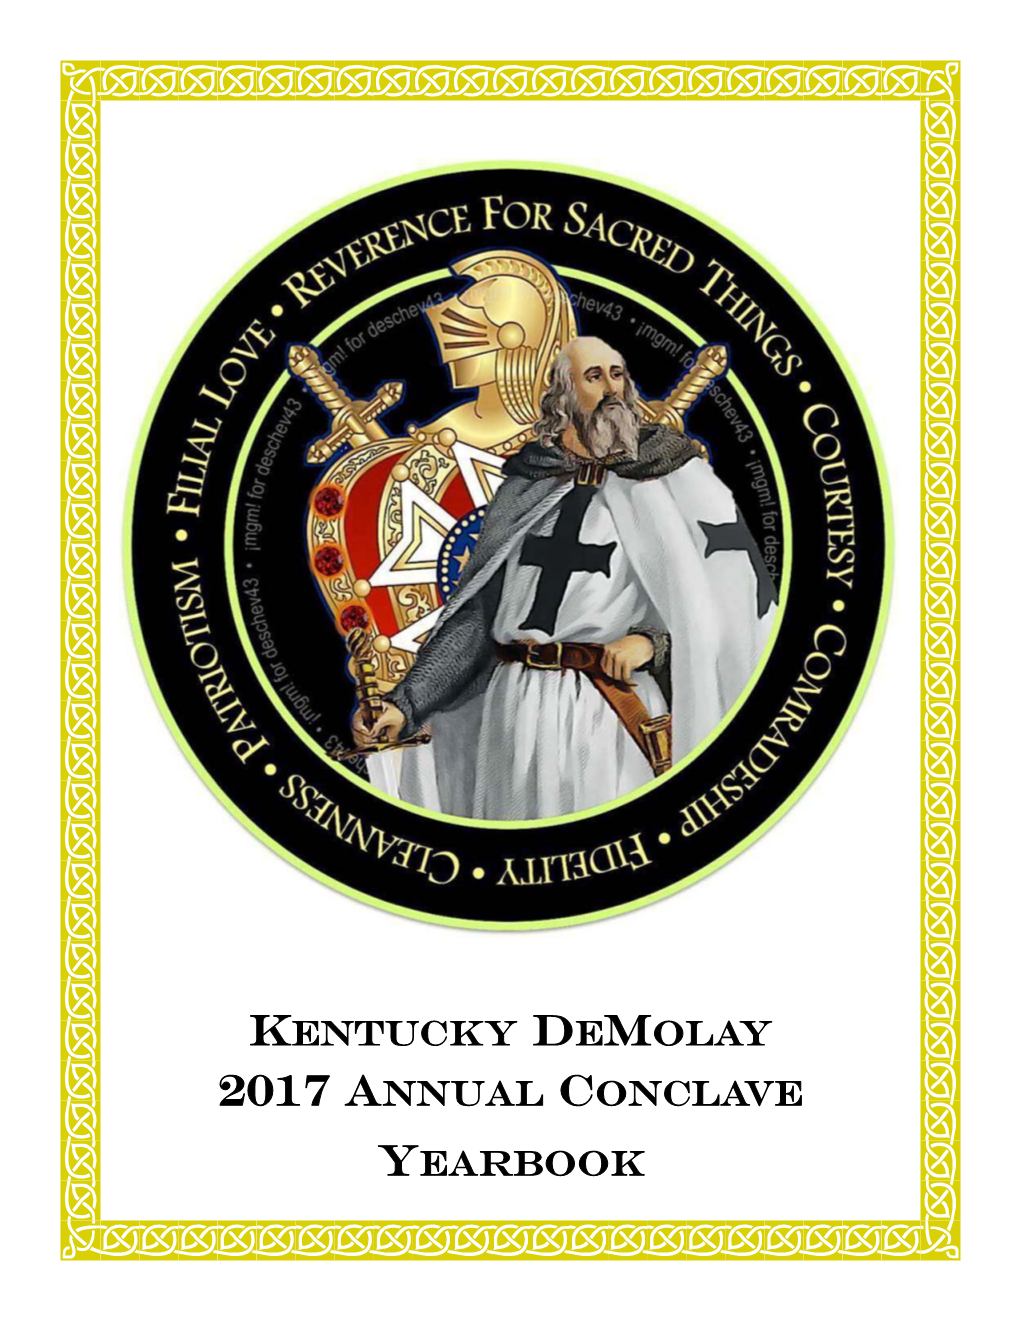 KENTUCKY DEMOLAY 2017 ANNUAL CONCLAVE YEARBOOK Welcome To